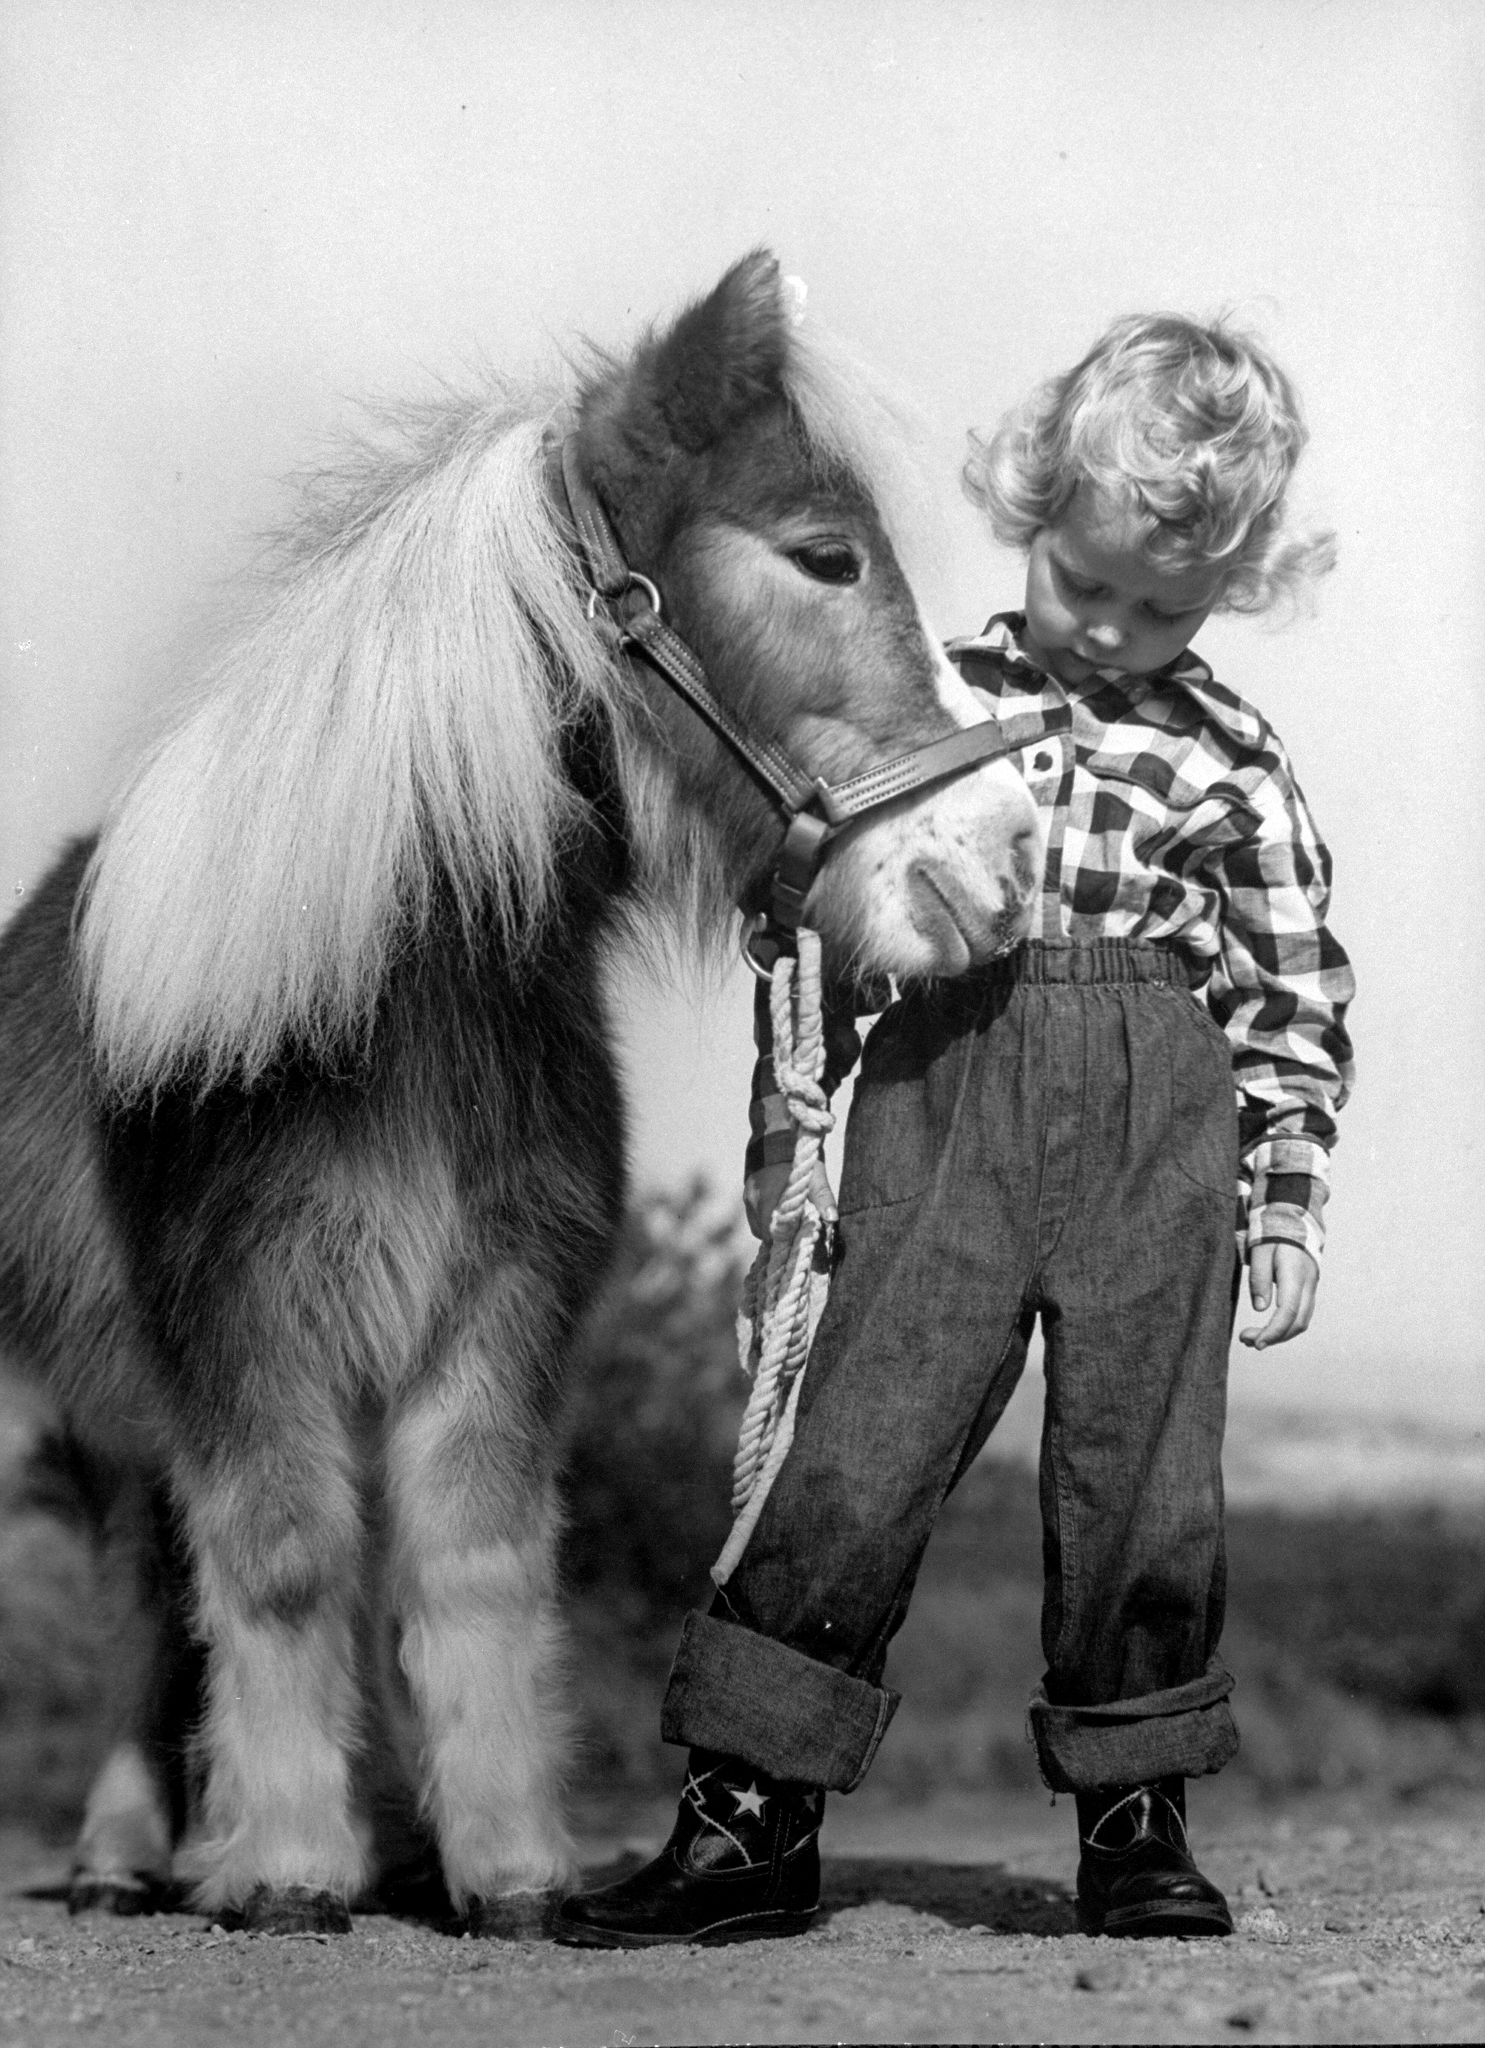 Child standing beside a miniature horse, showing size comparison, Los Angeles, Calif., 1952.